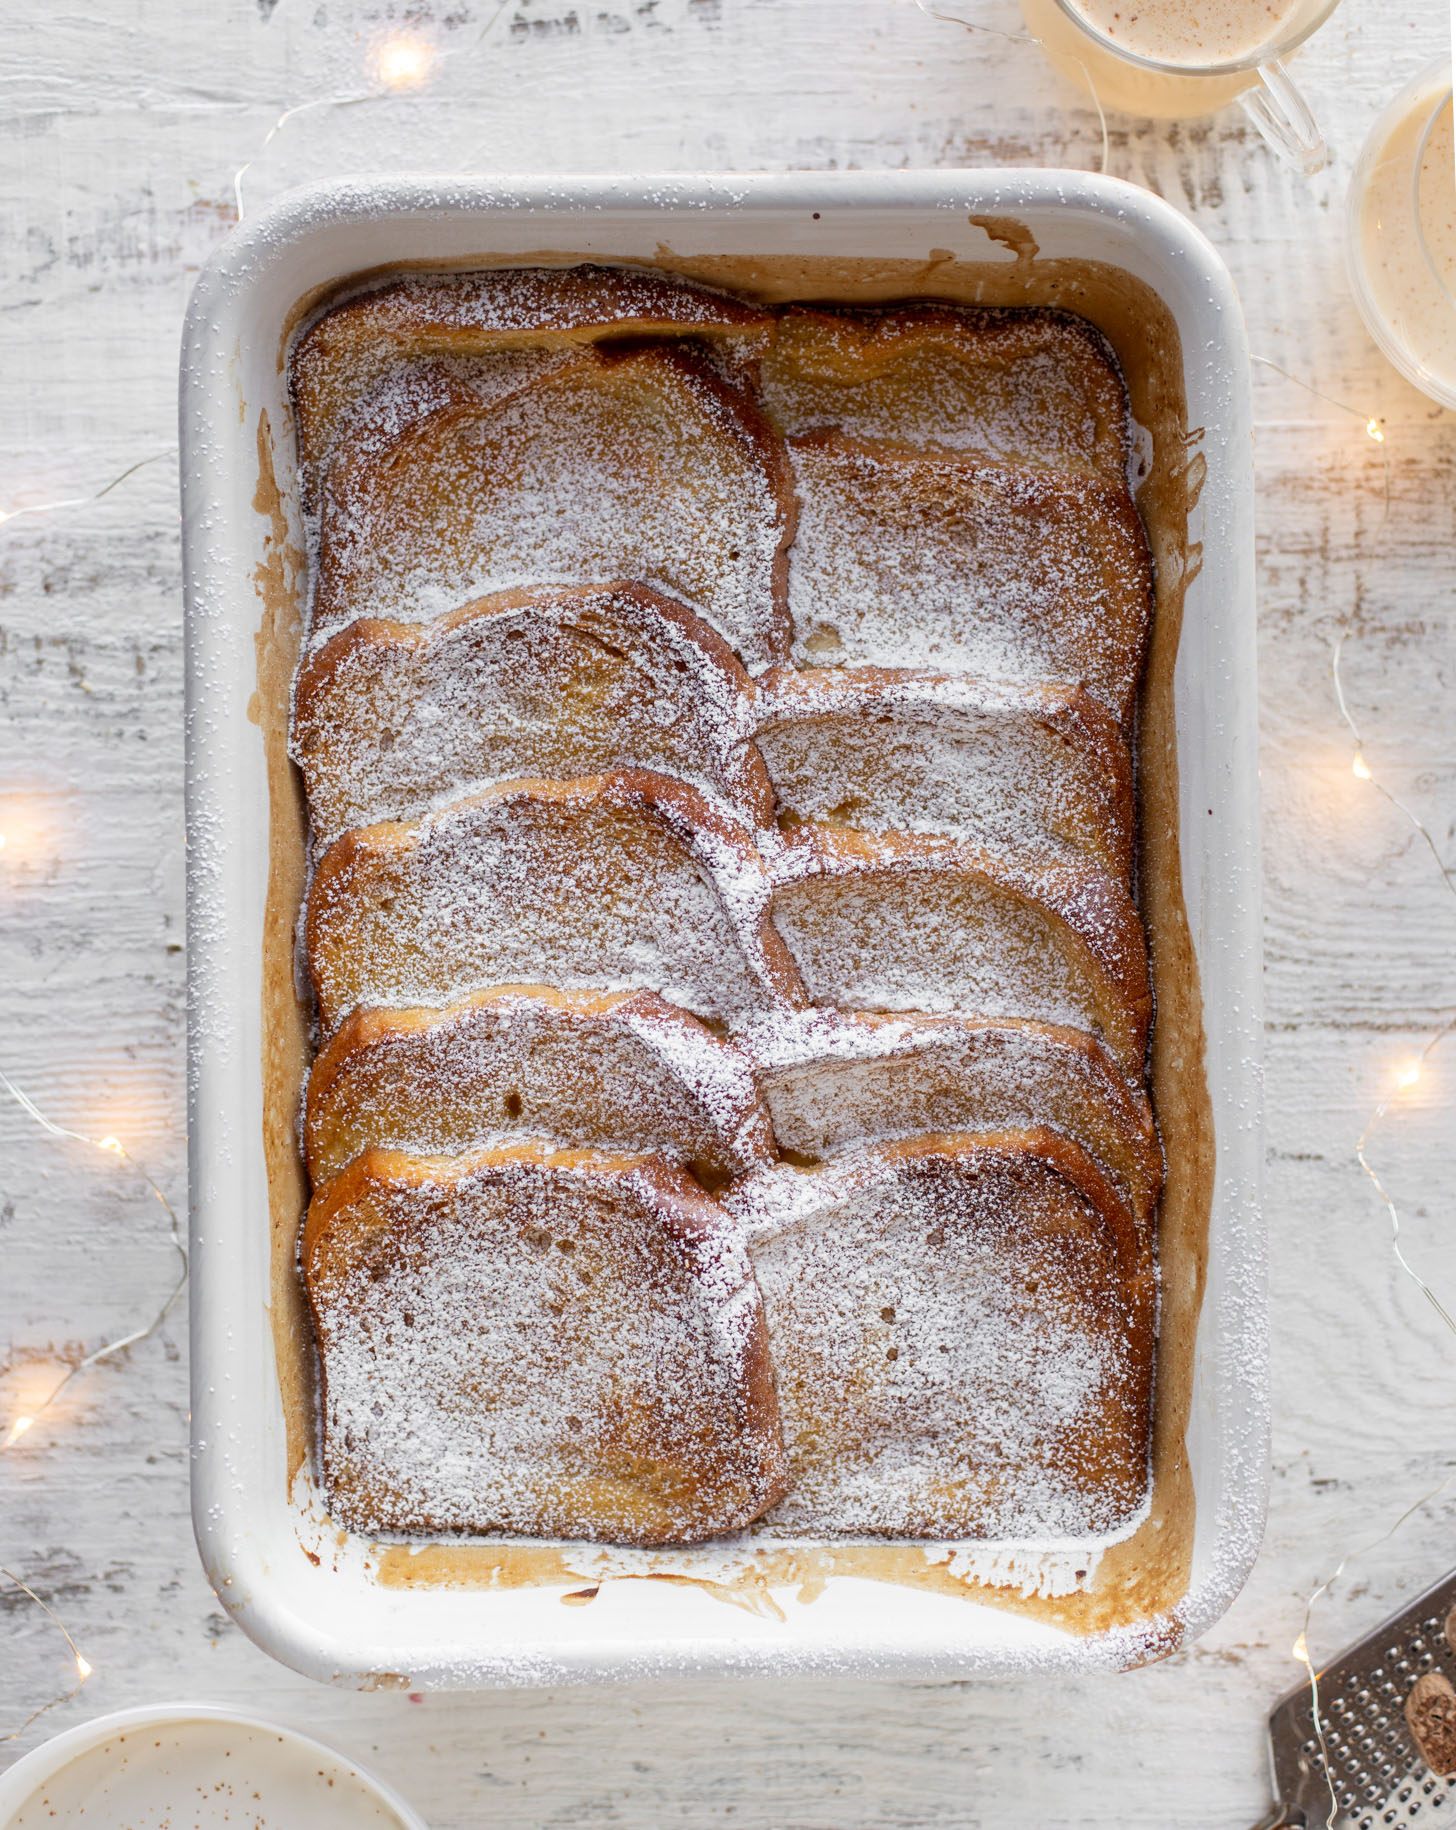 eggnog creme brulee french toast with bourbon whipped cream